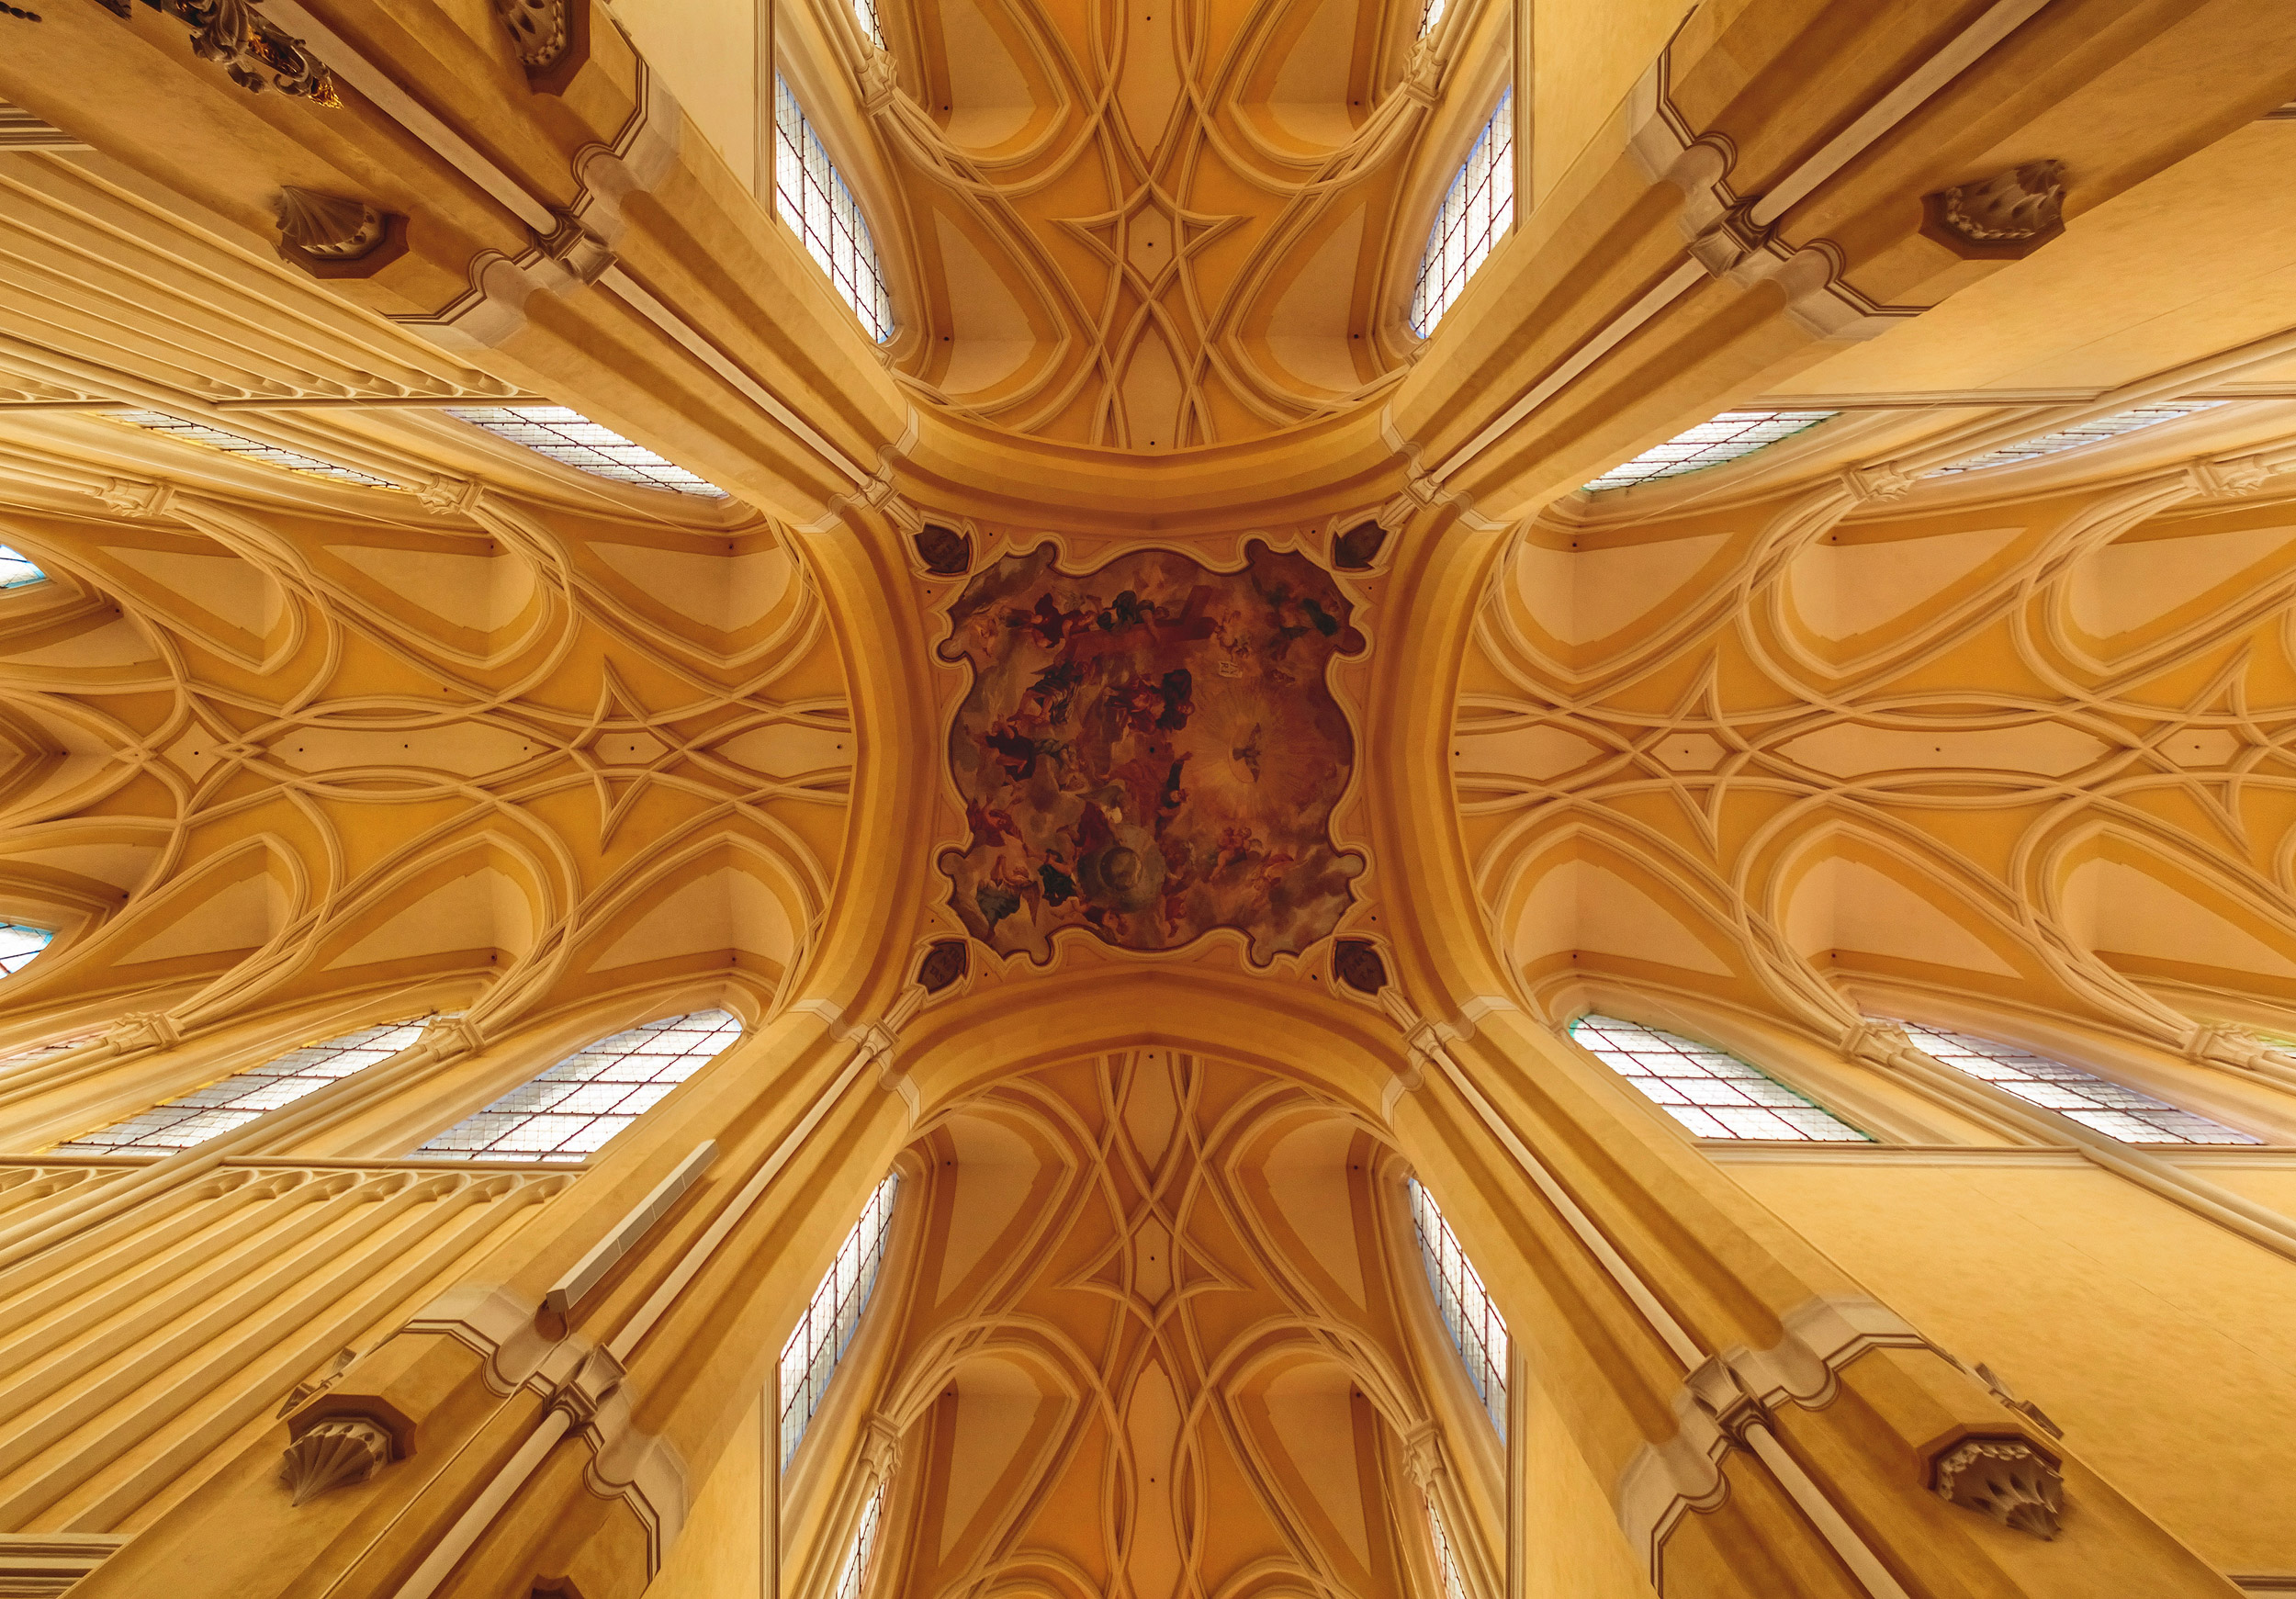 The ceiling of Cathedral of the Assumption of Our Lady at Sedlec